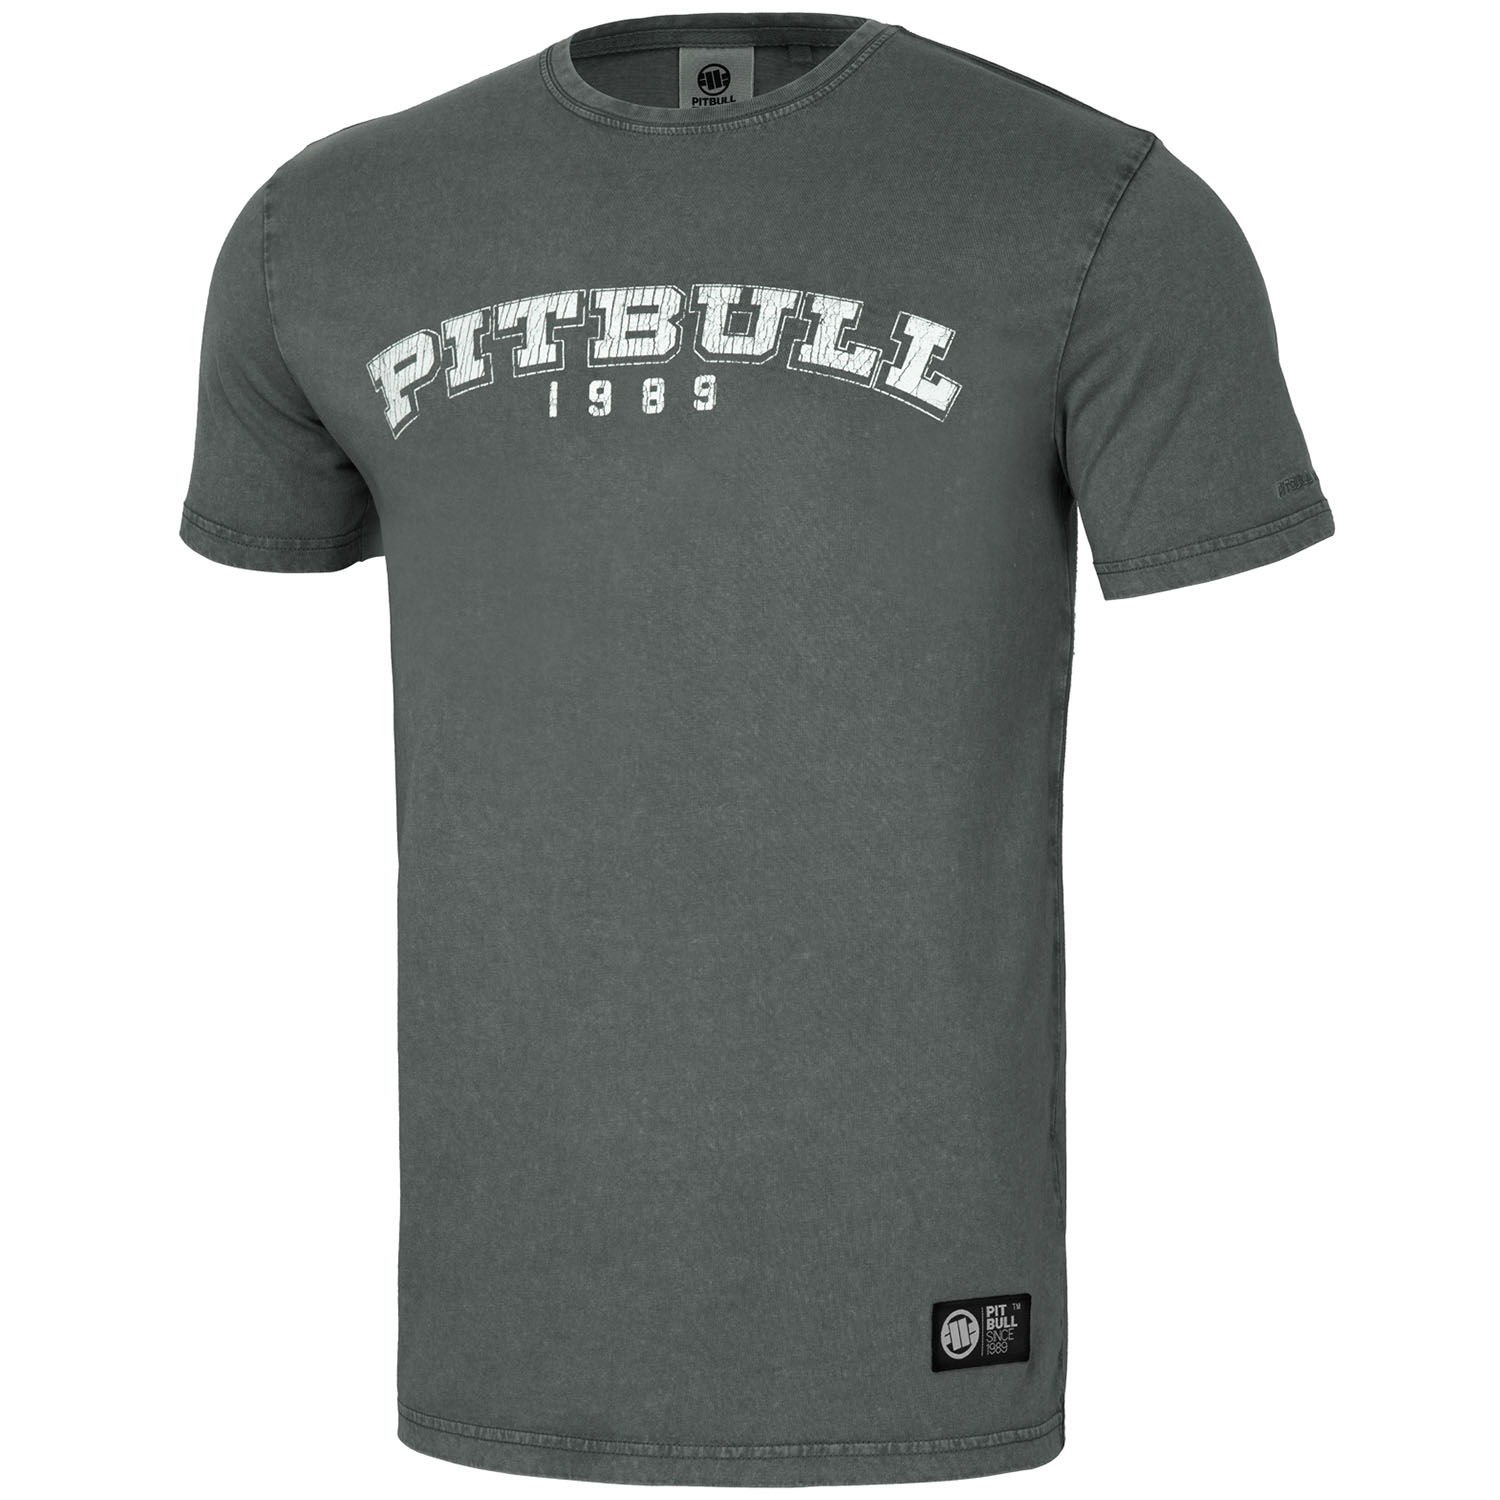 Pit Bull West Coast T-Shirt, Born In 1989, Washed, graphite